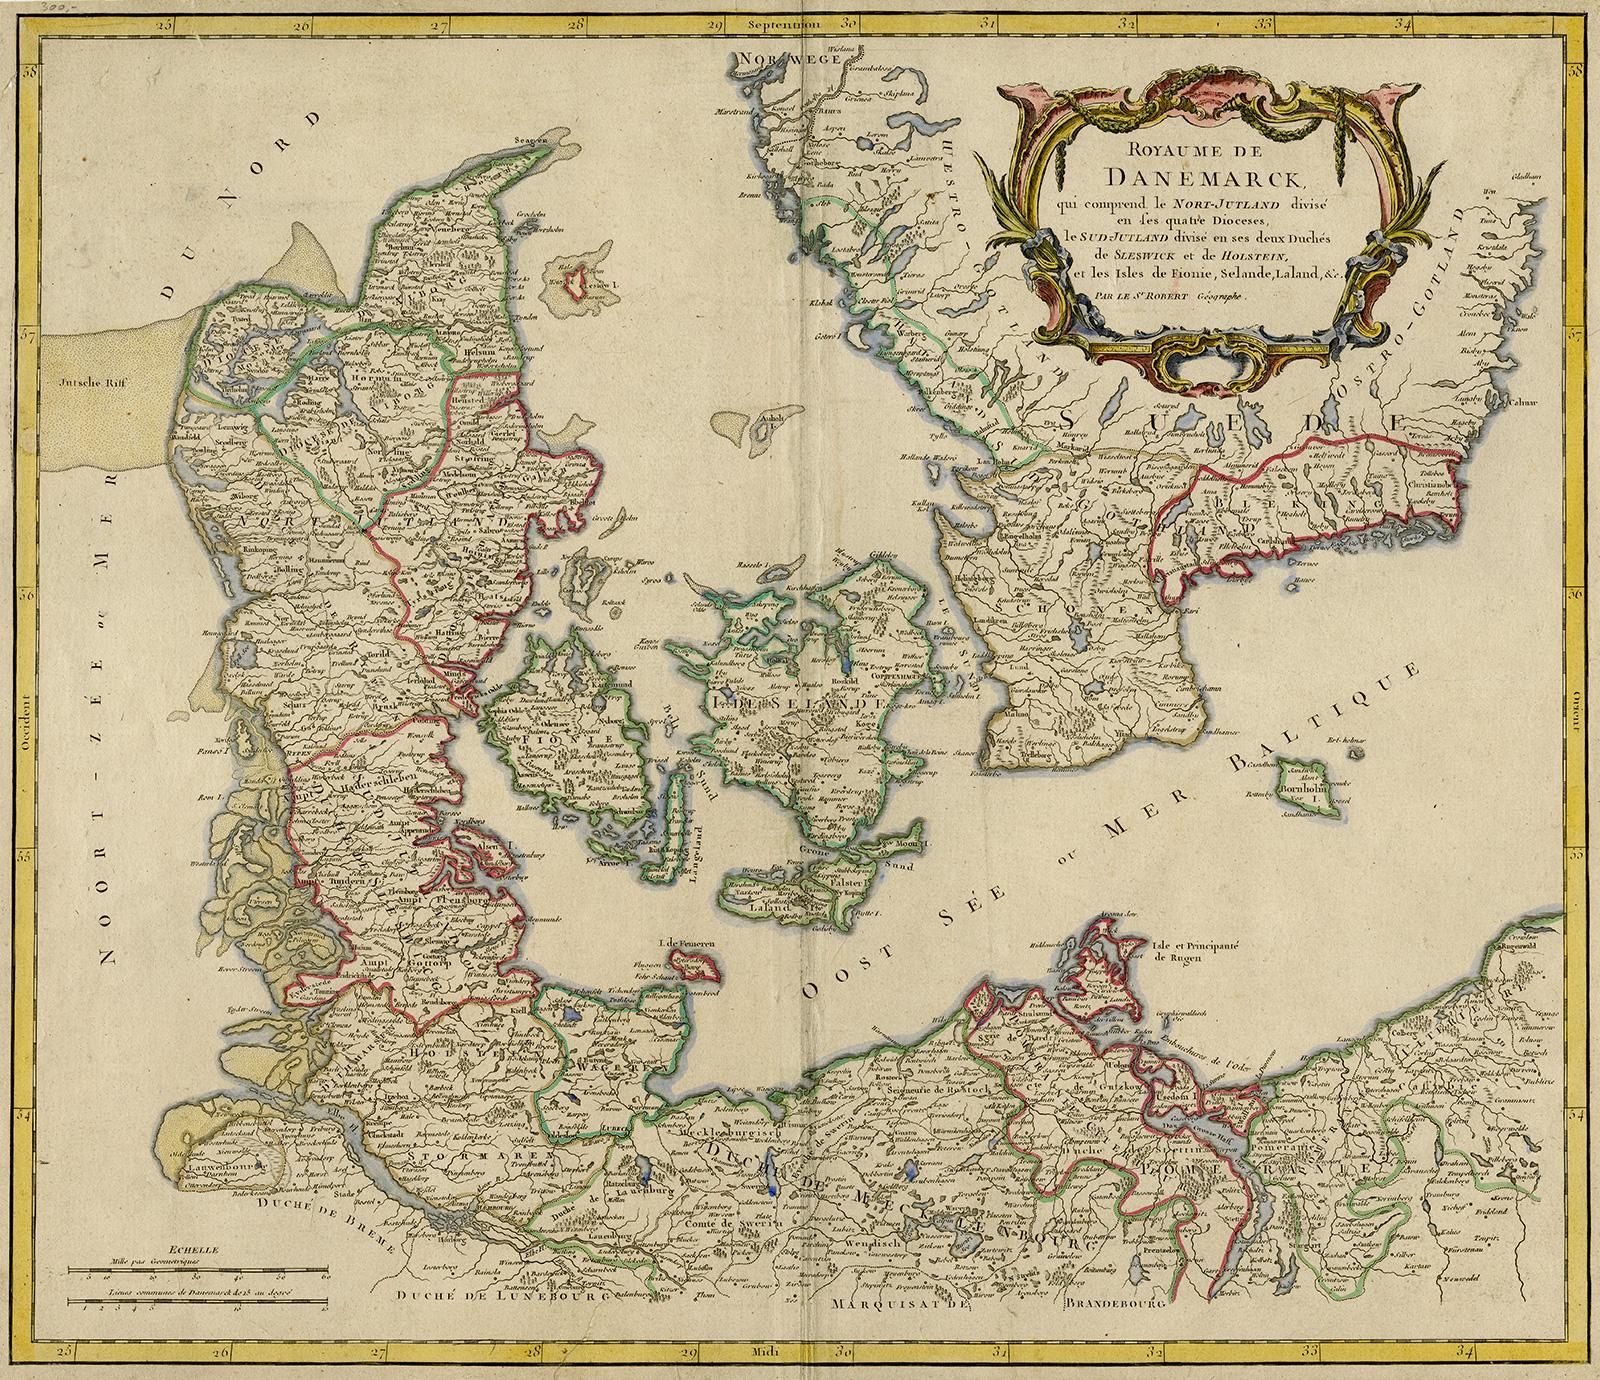 Unknown Print - Antique map of Denmark and Jutland by de Vaugondy - Handcol. engraving - 18th c.